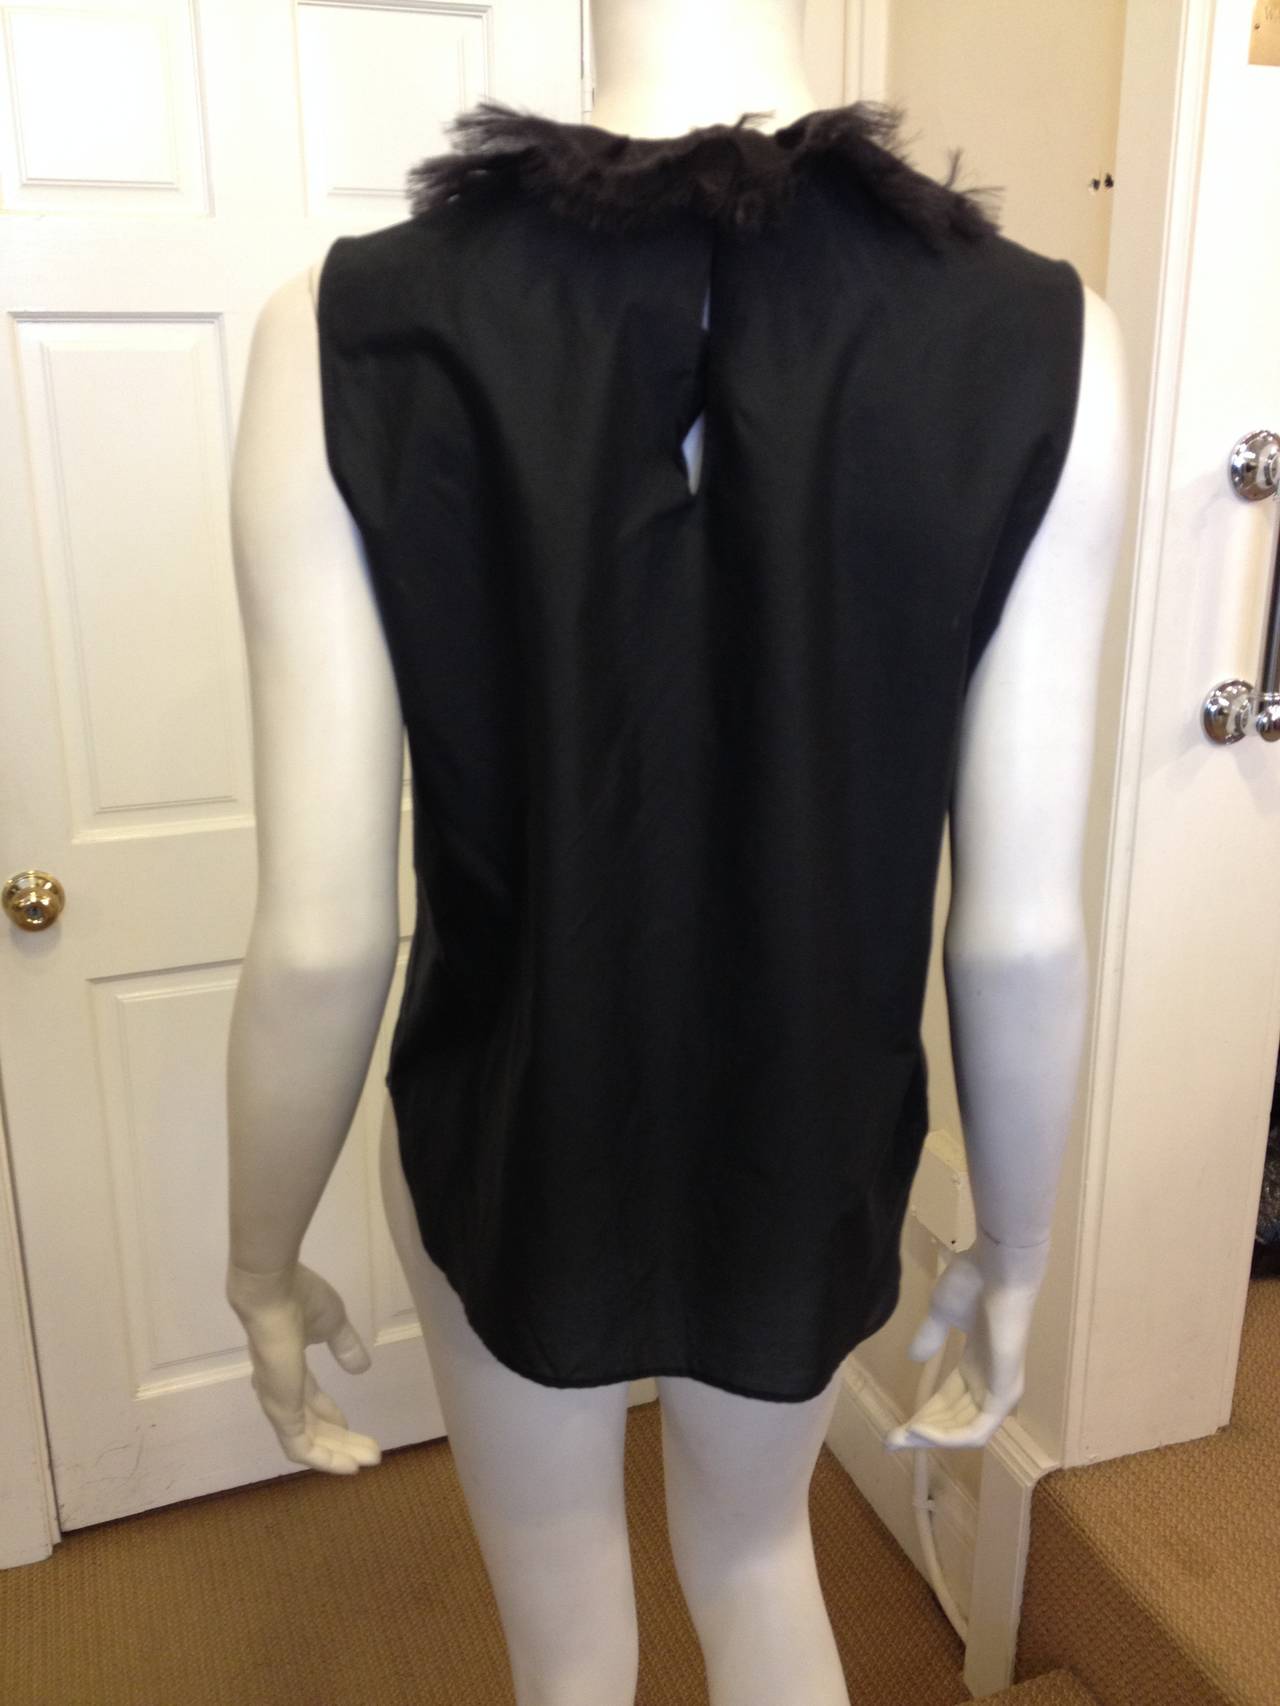 Yves Saint Laurent Black Sleeveless Top with Ruffle In Excellent Condition In San Francisco, CA